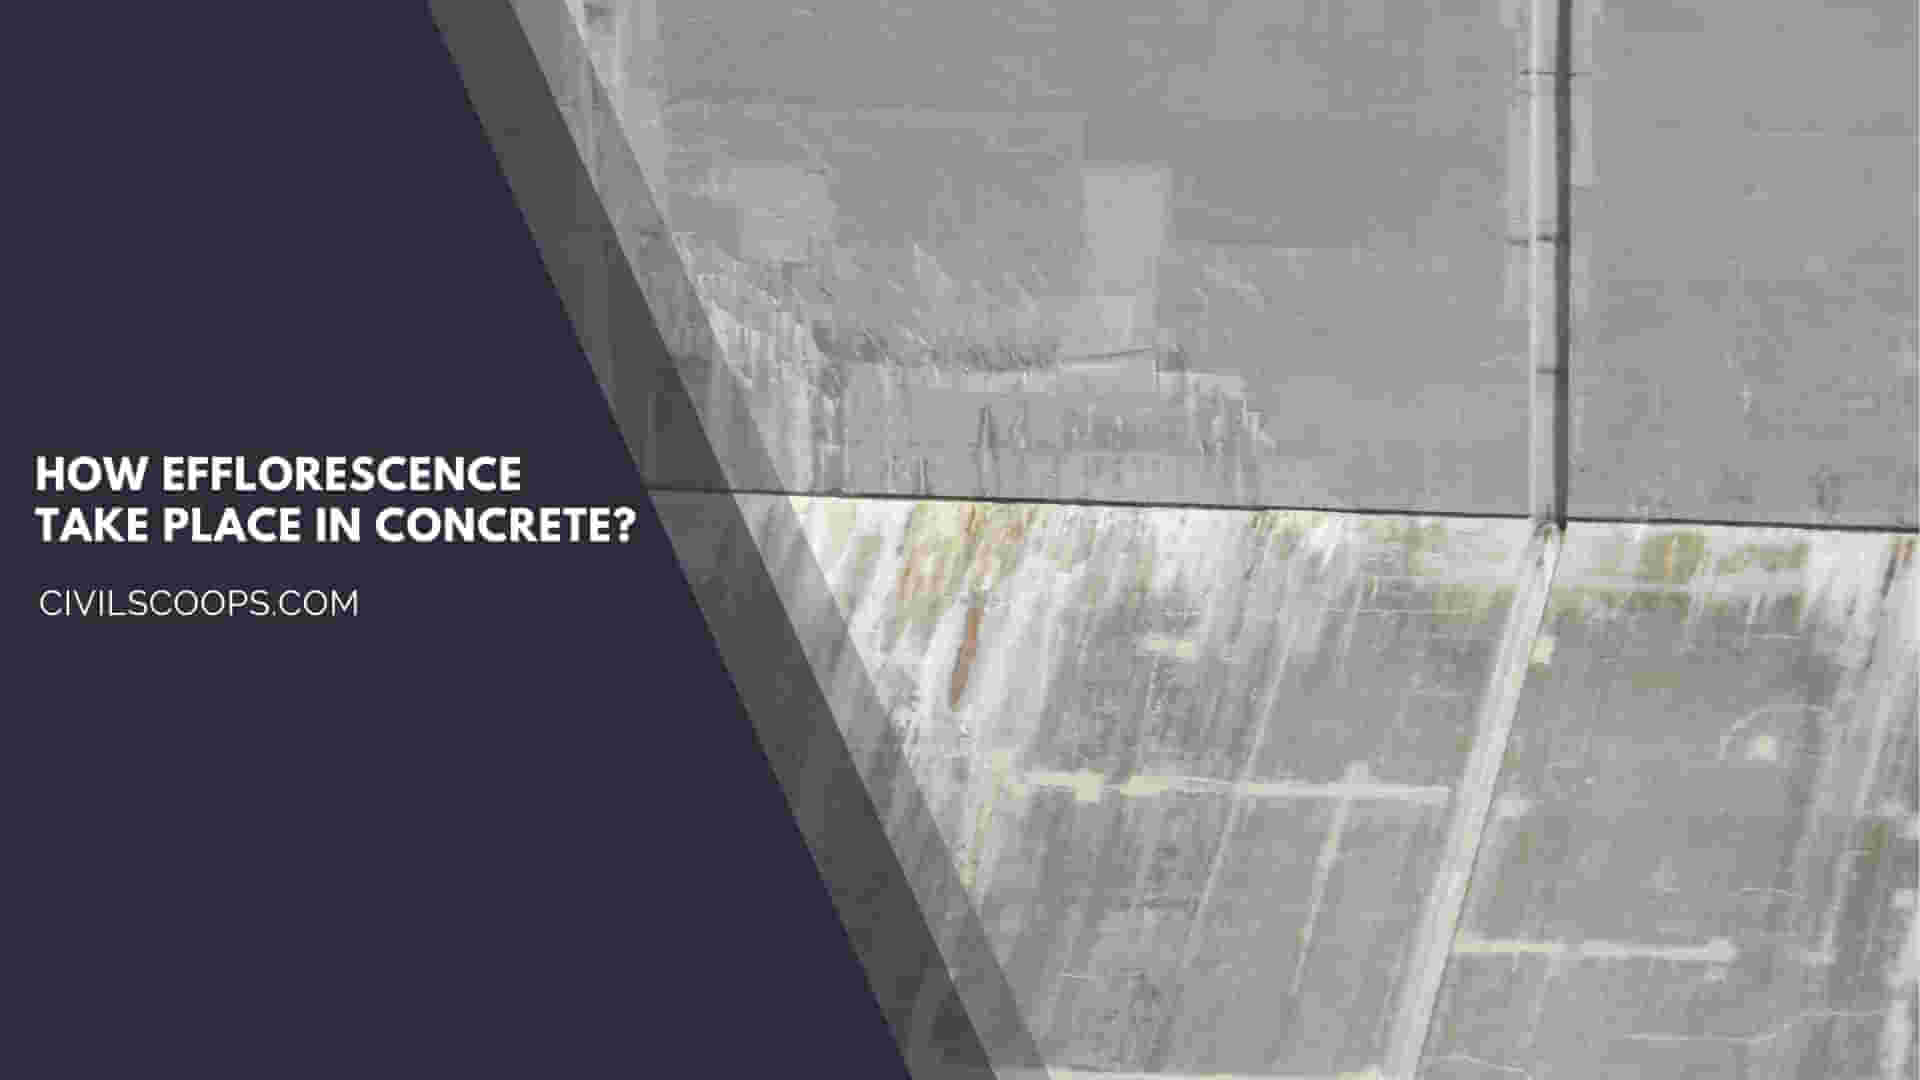 How Efflorescence Take Place in Concrete